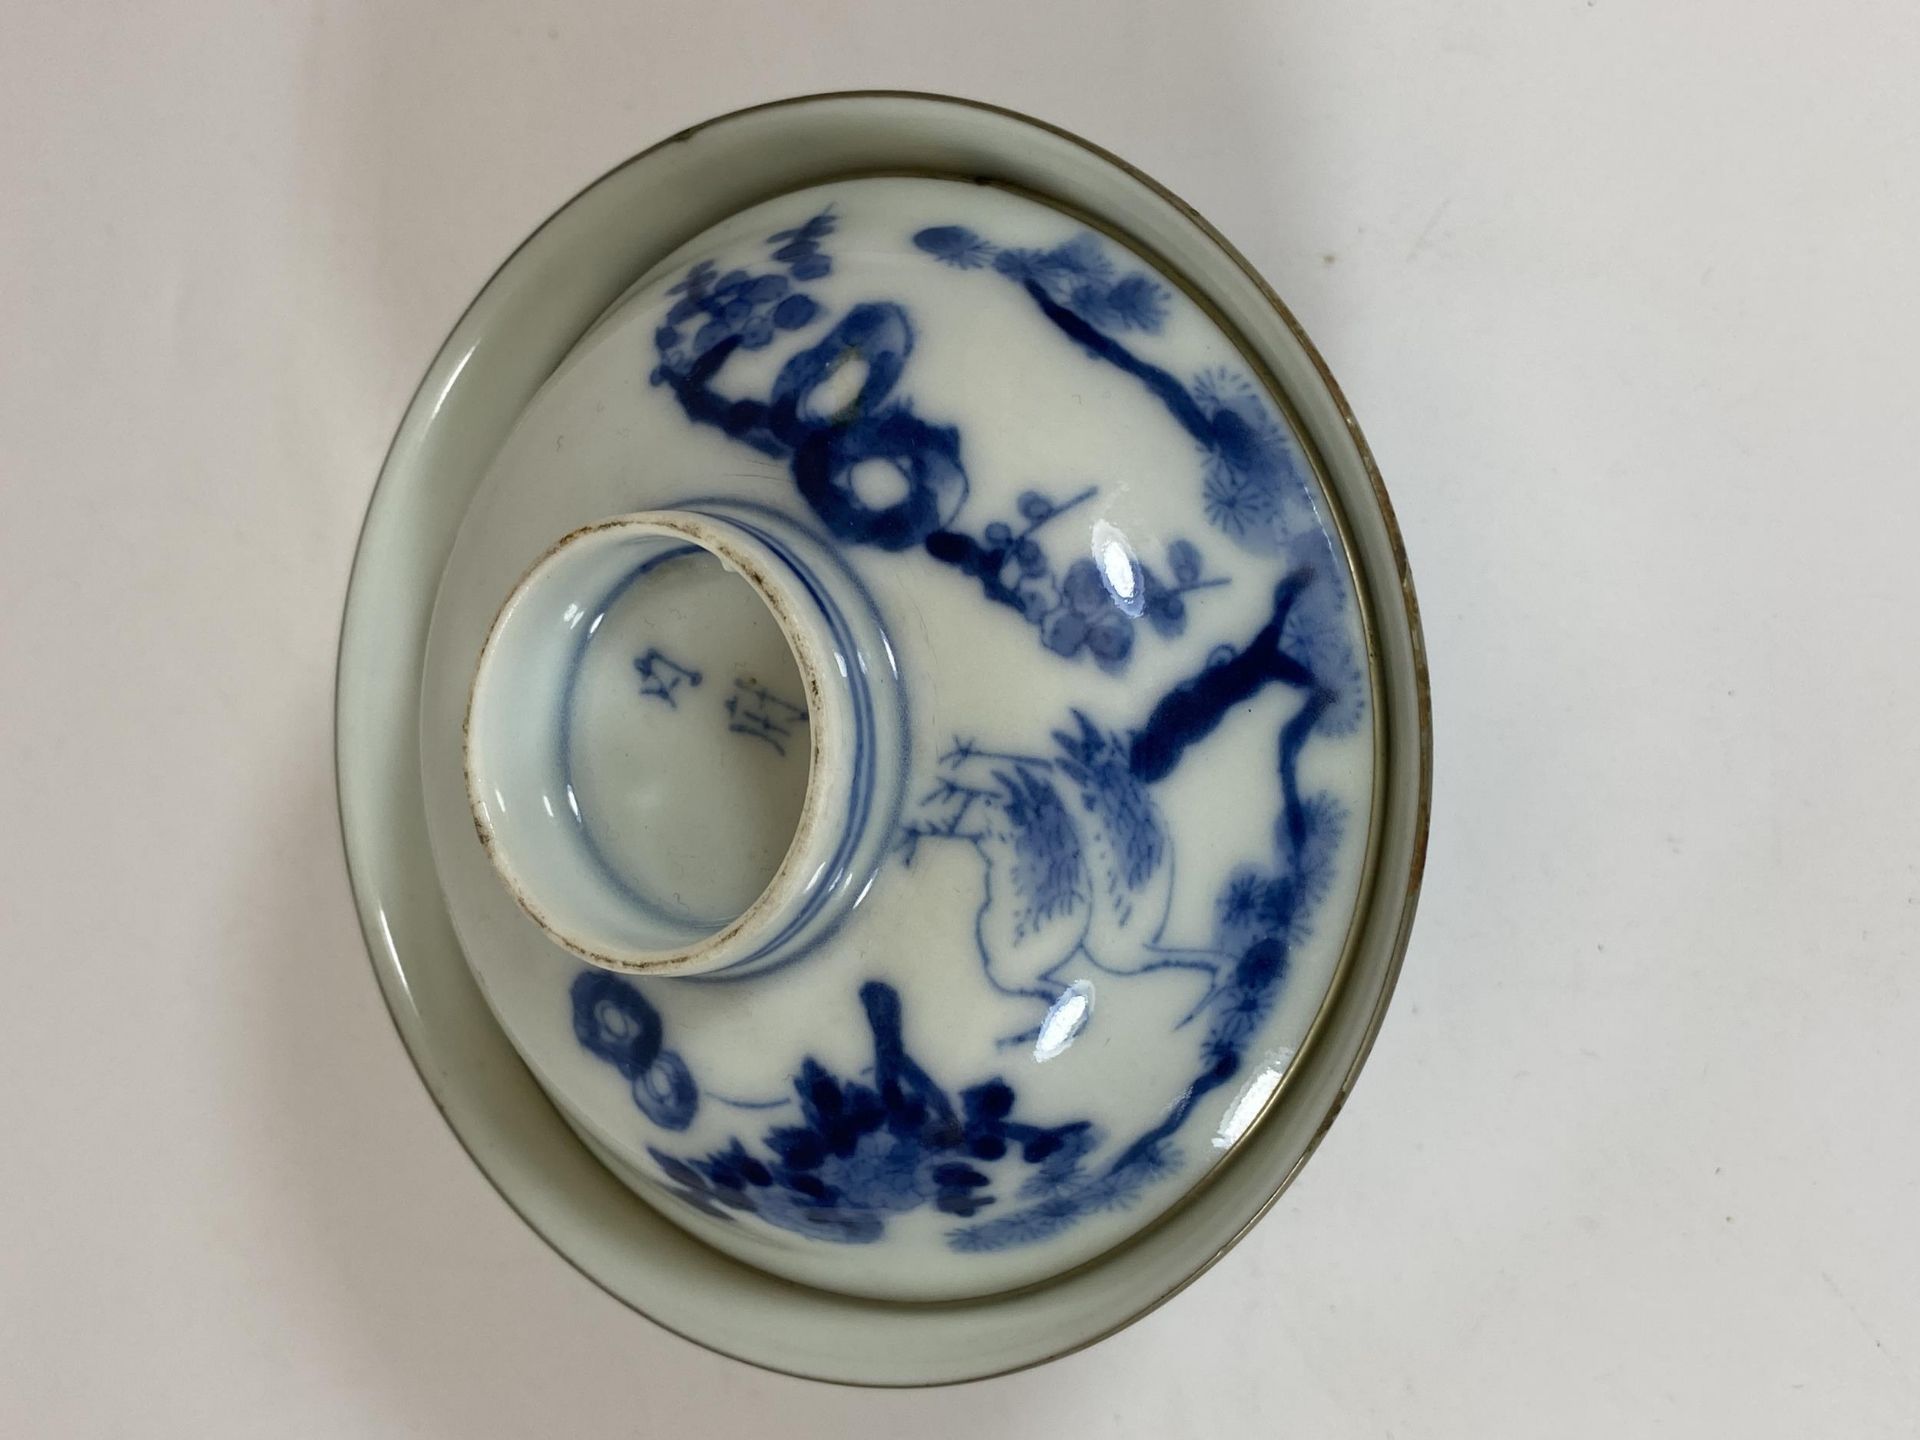 A CHINESE BLUE AND WHITE PORCELAIN TEA BOWL WITH SAUCER LID, HEIGHT 9CM - Image 2 of 4